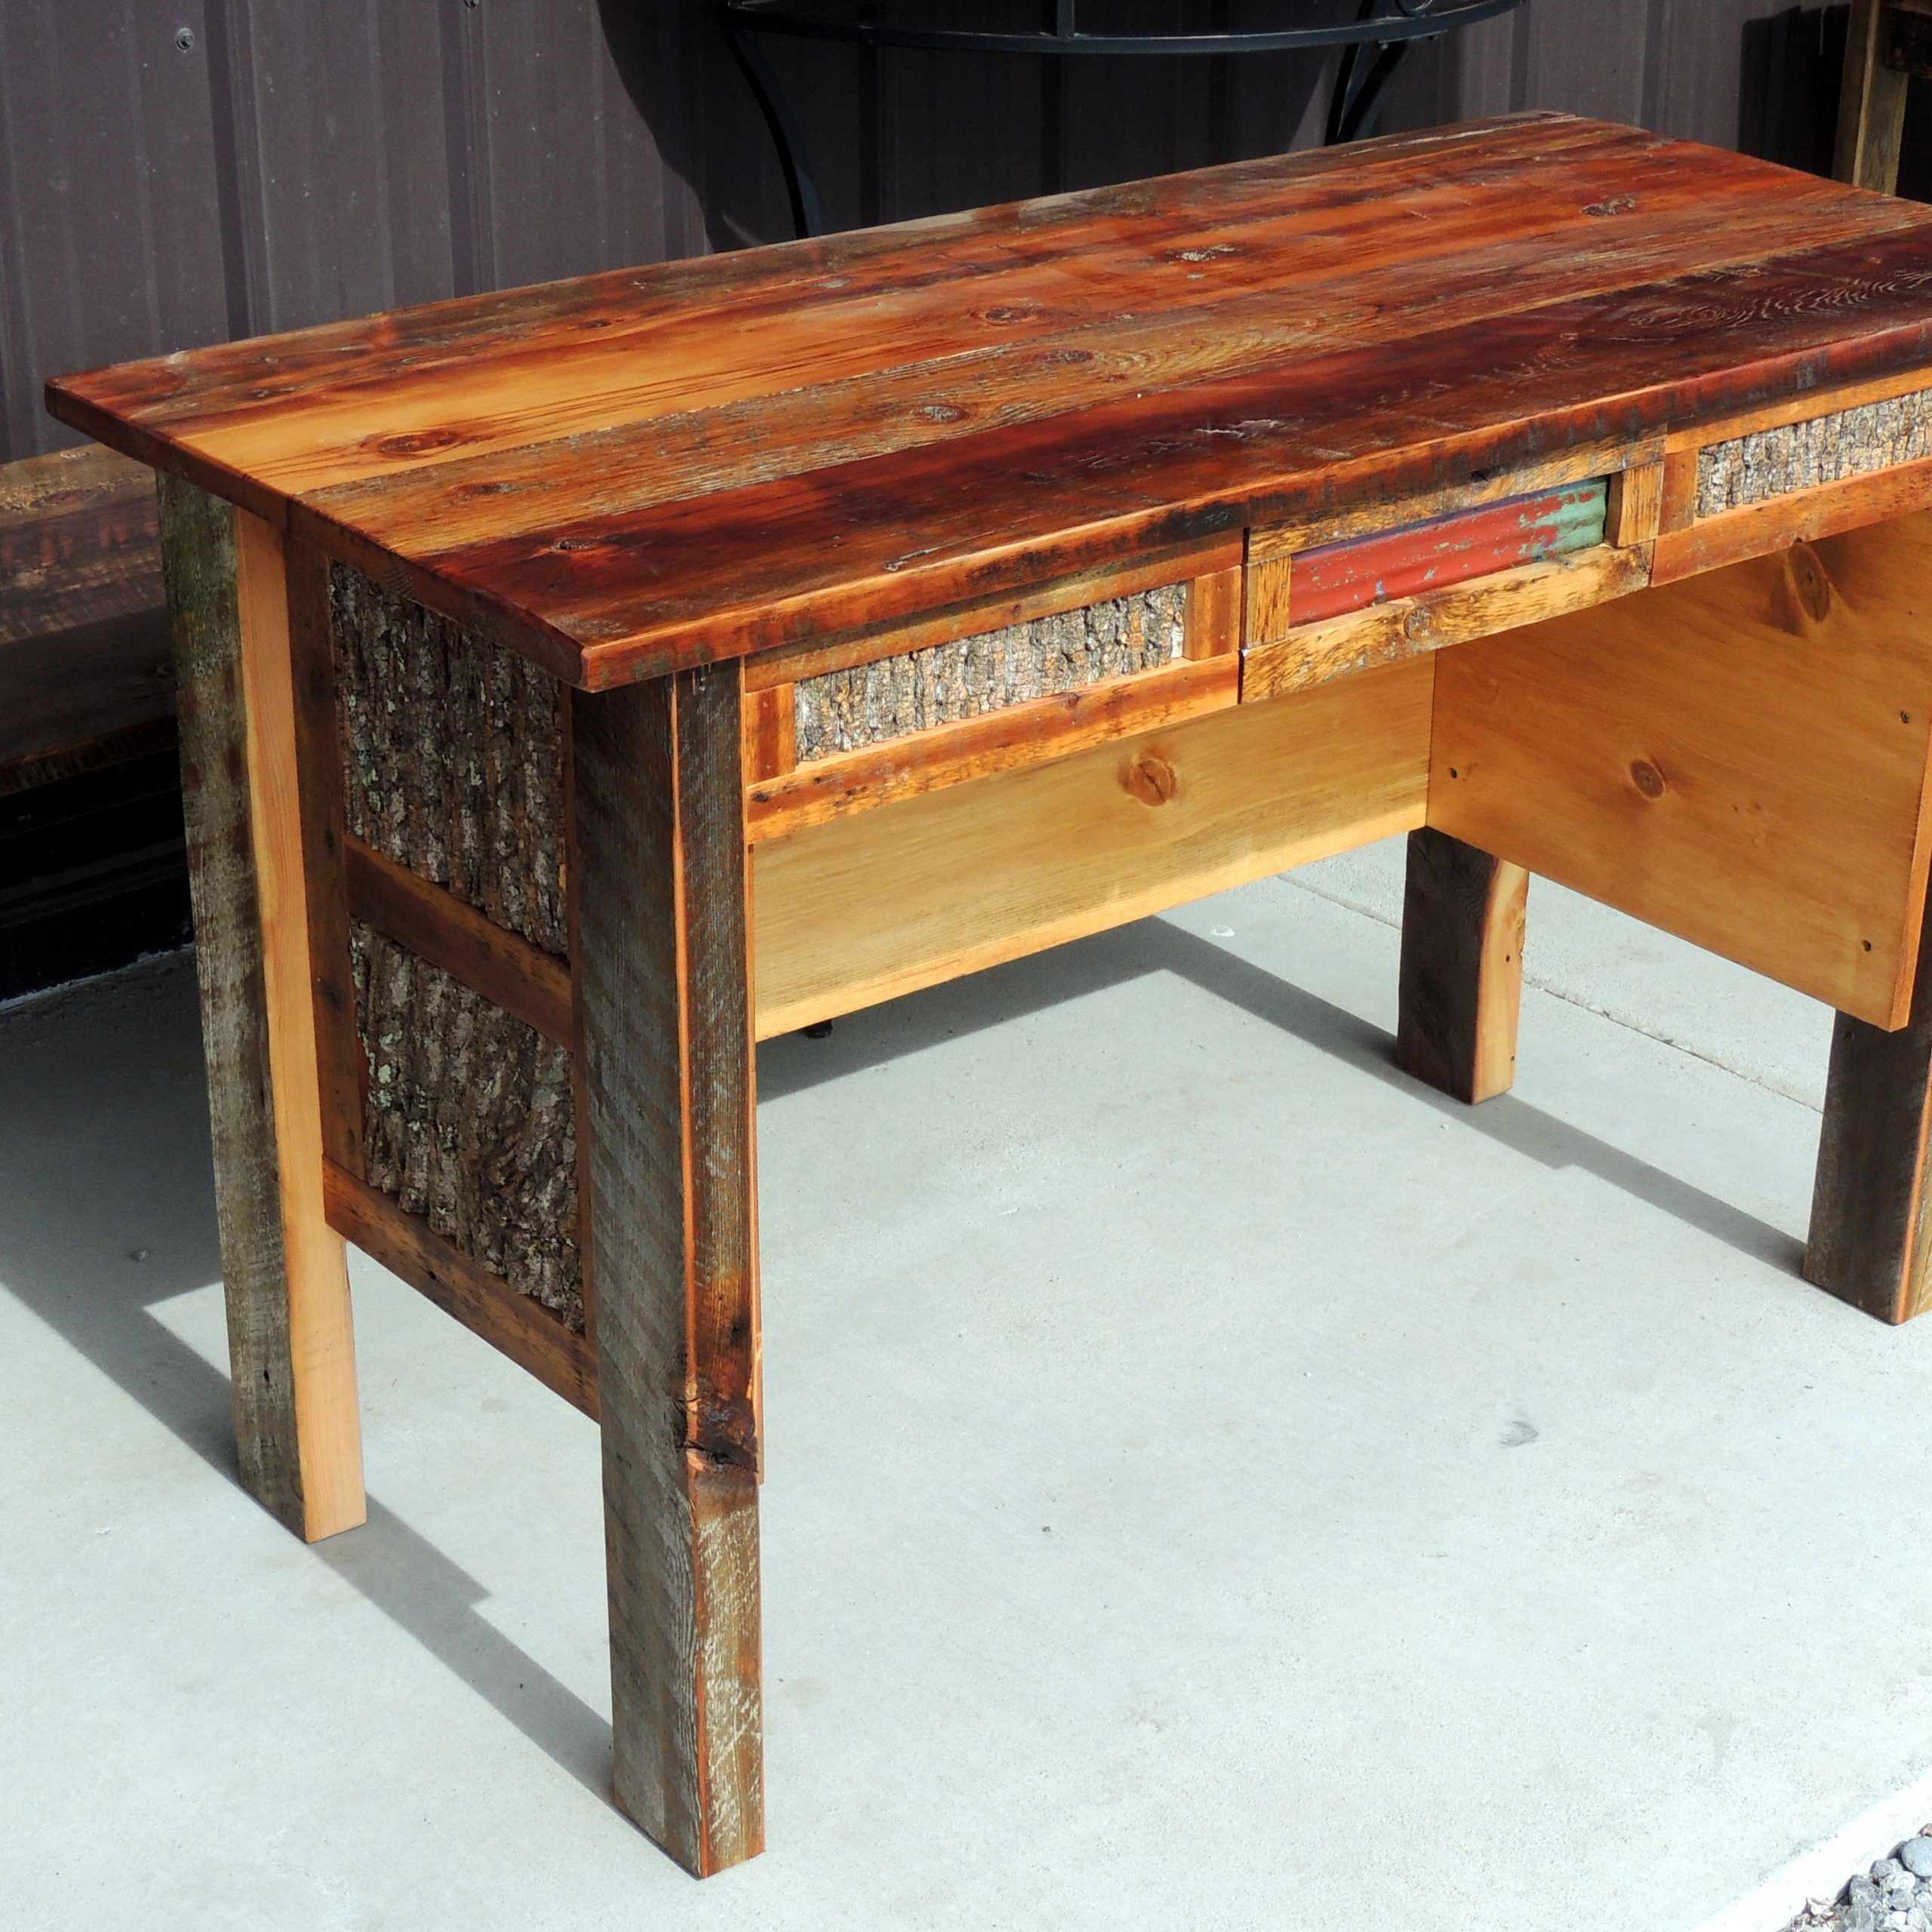 Rustic Barnwood Writing Desk With Red Tin In Drawer And Bark Inset On Pertaining To Rustic Acacia Wooden Writing Desks (View 2 of 15)